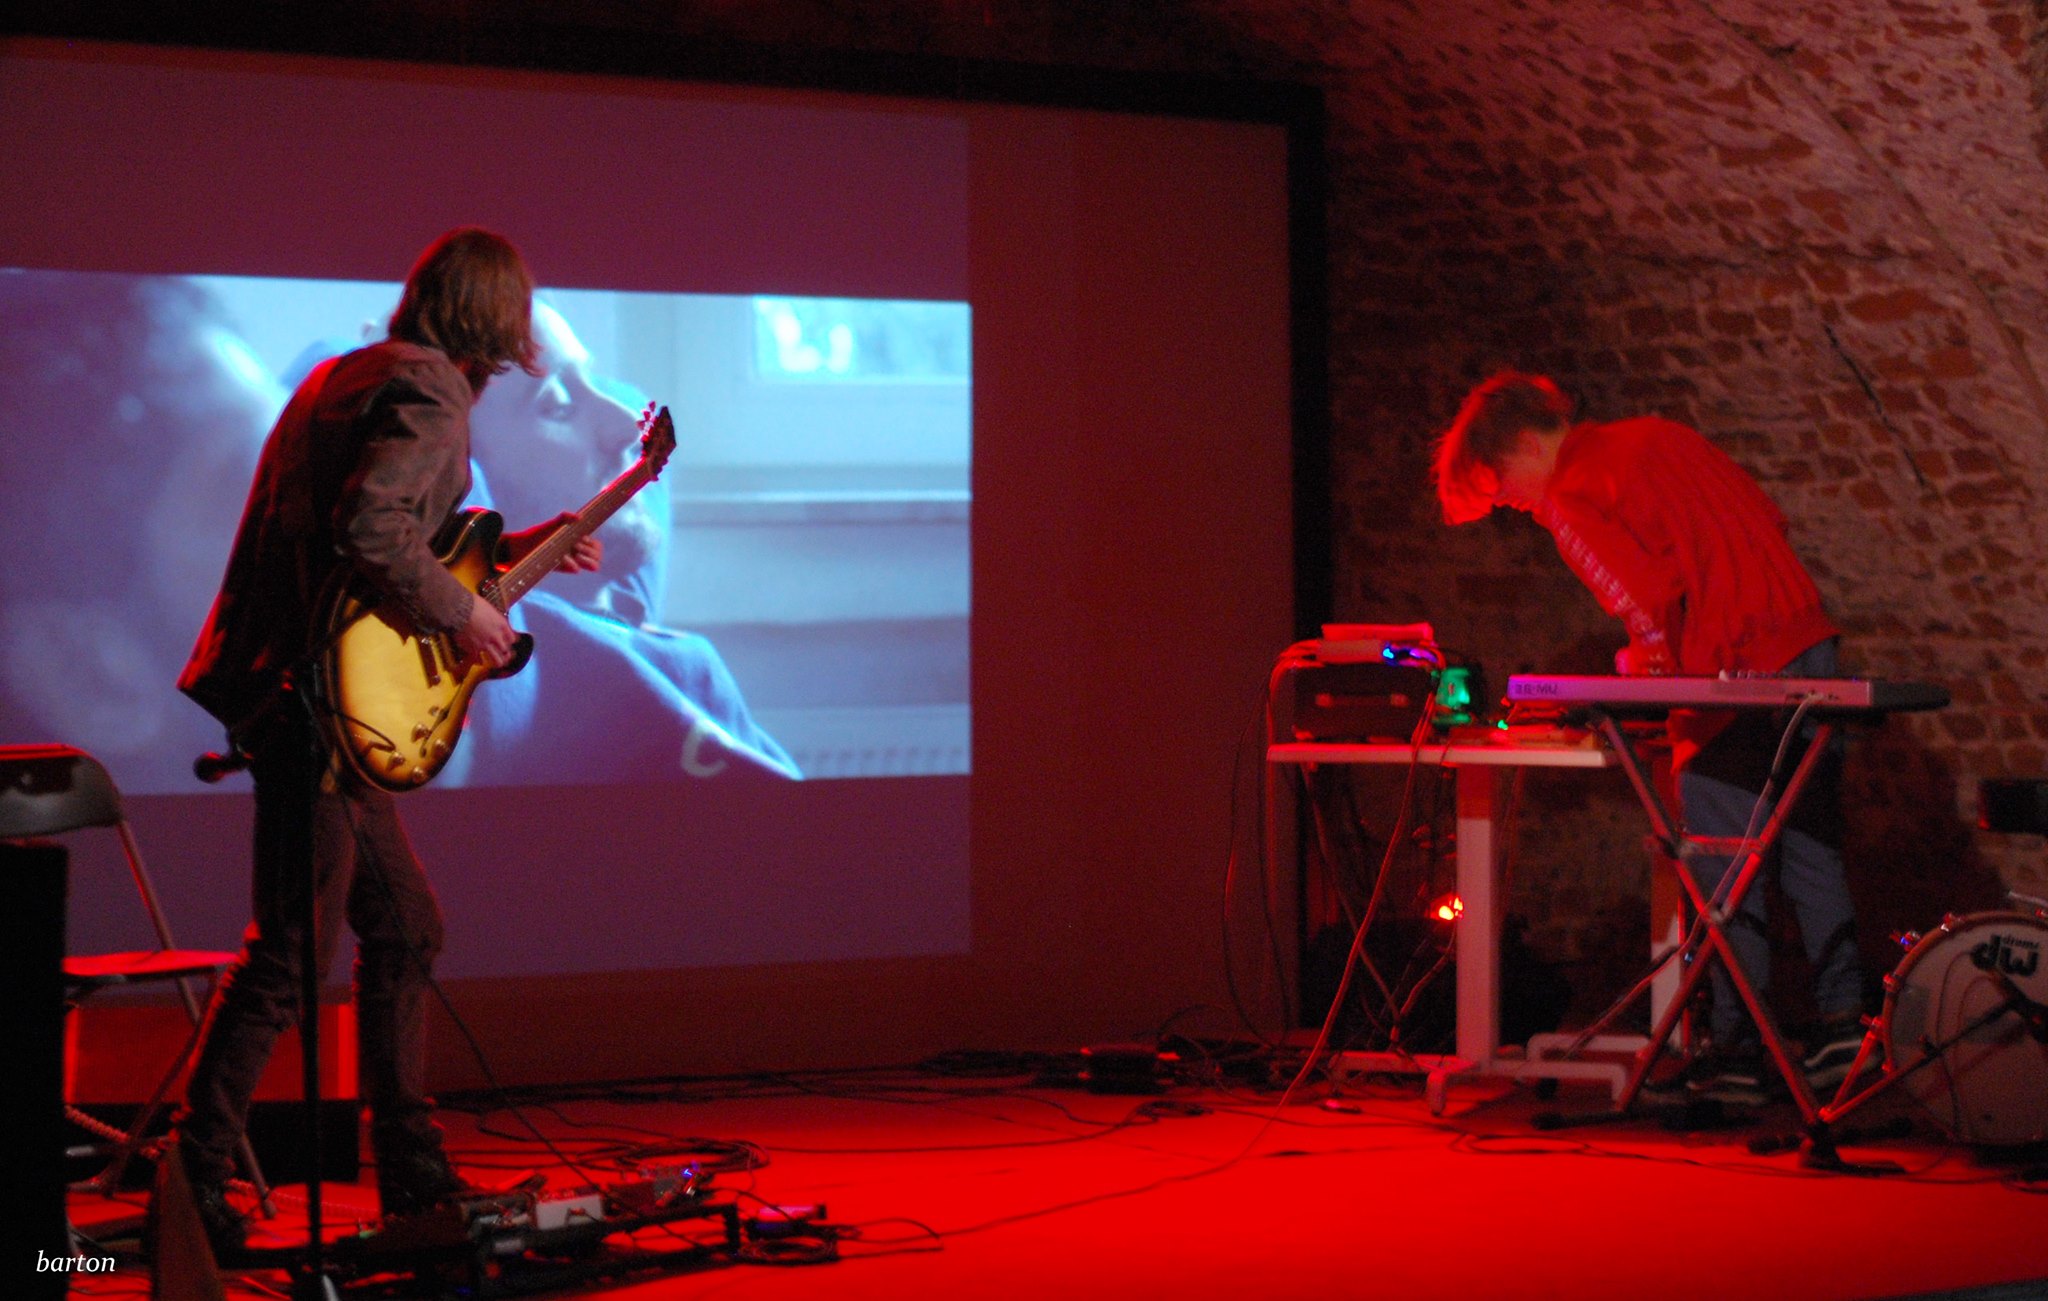 A film accompanied with improvised live music